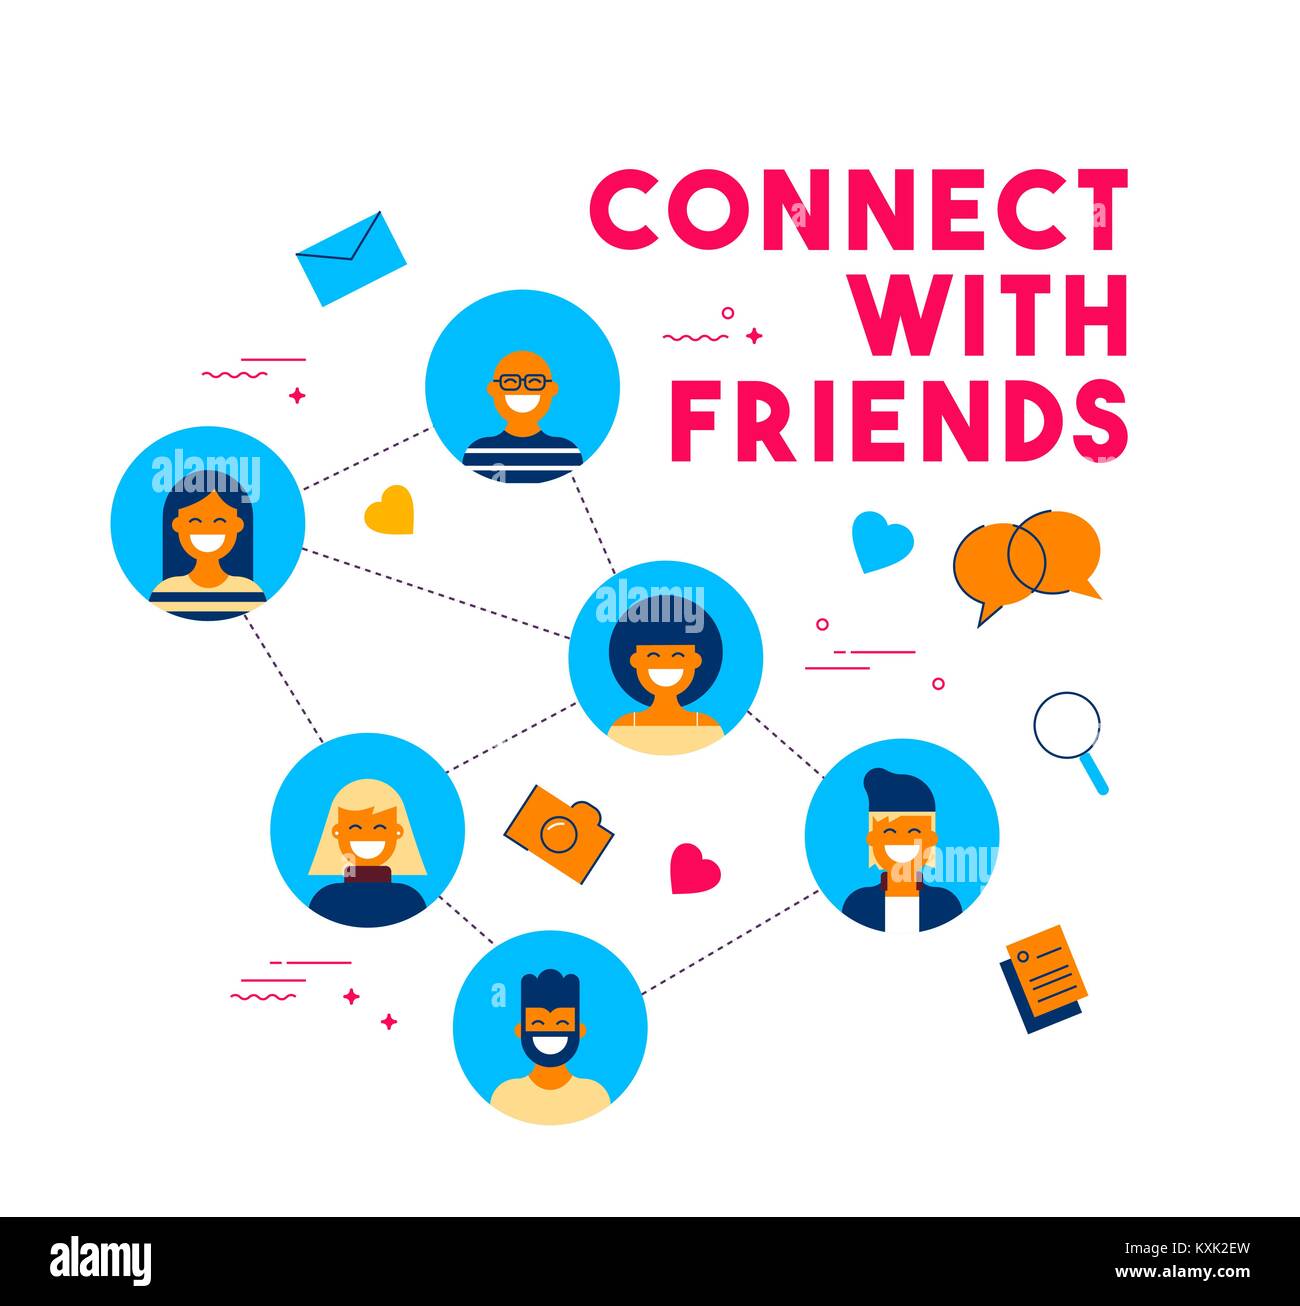 Connect with friends concept illustration in flat style. People group connected on social media network doing online internet activities. EPS10 vector Stock Vector